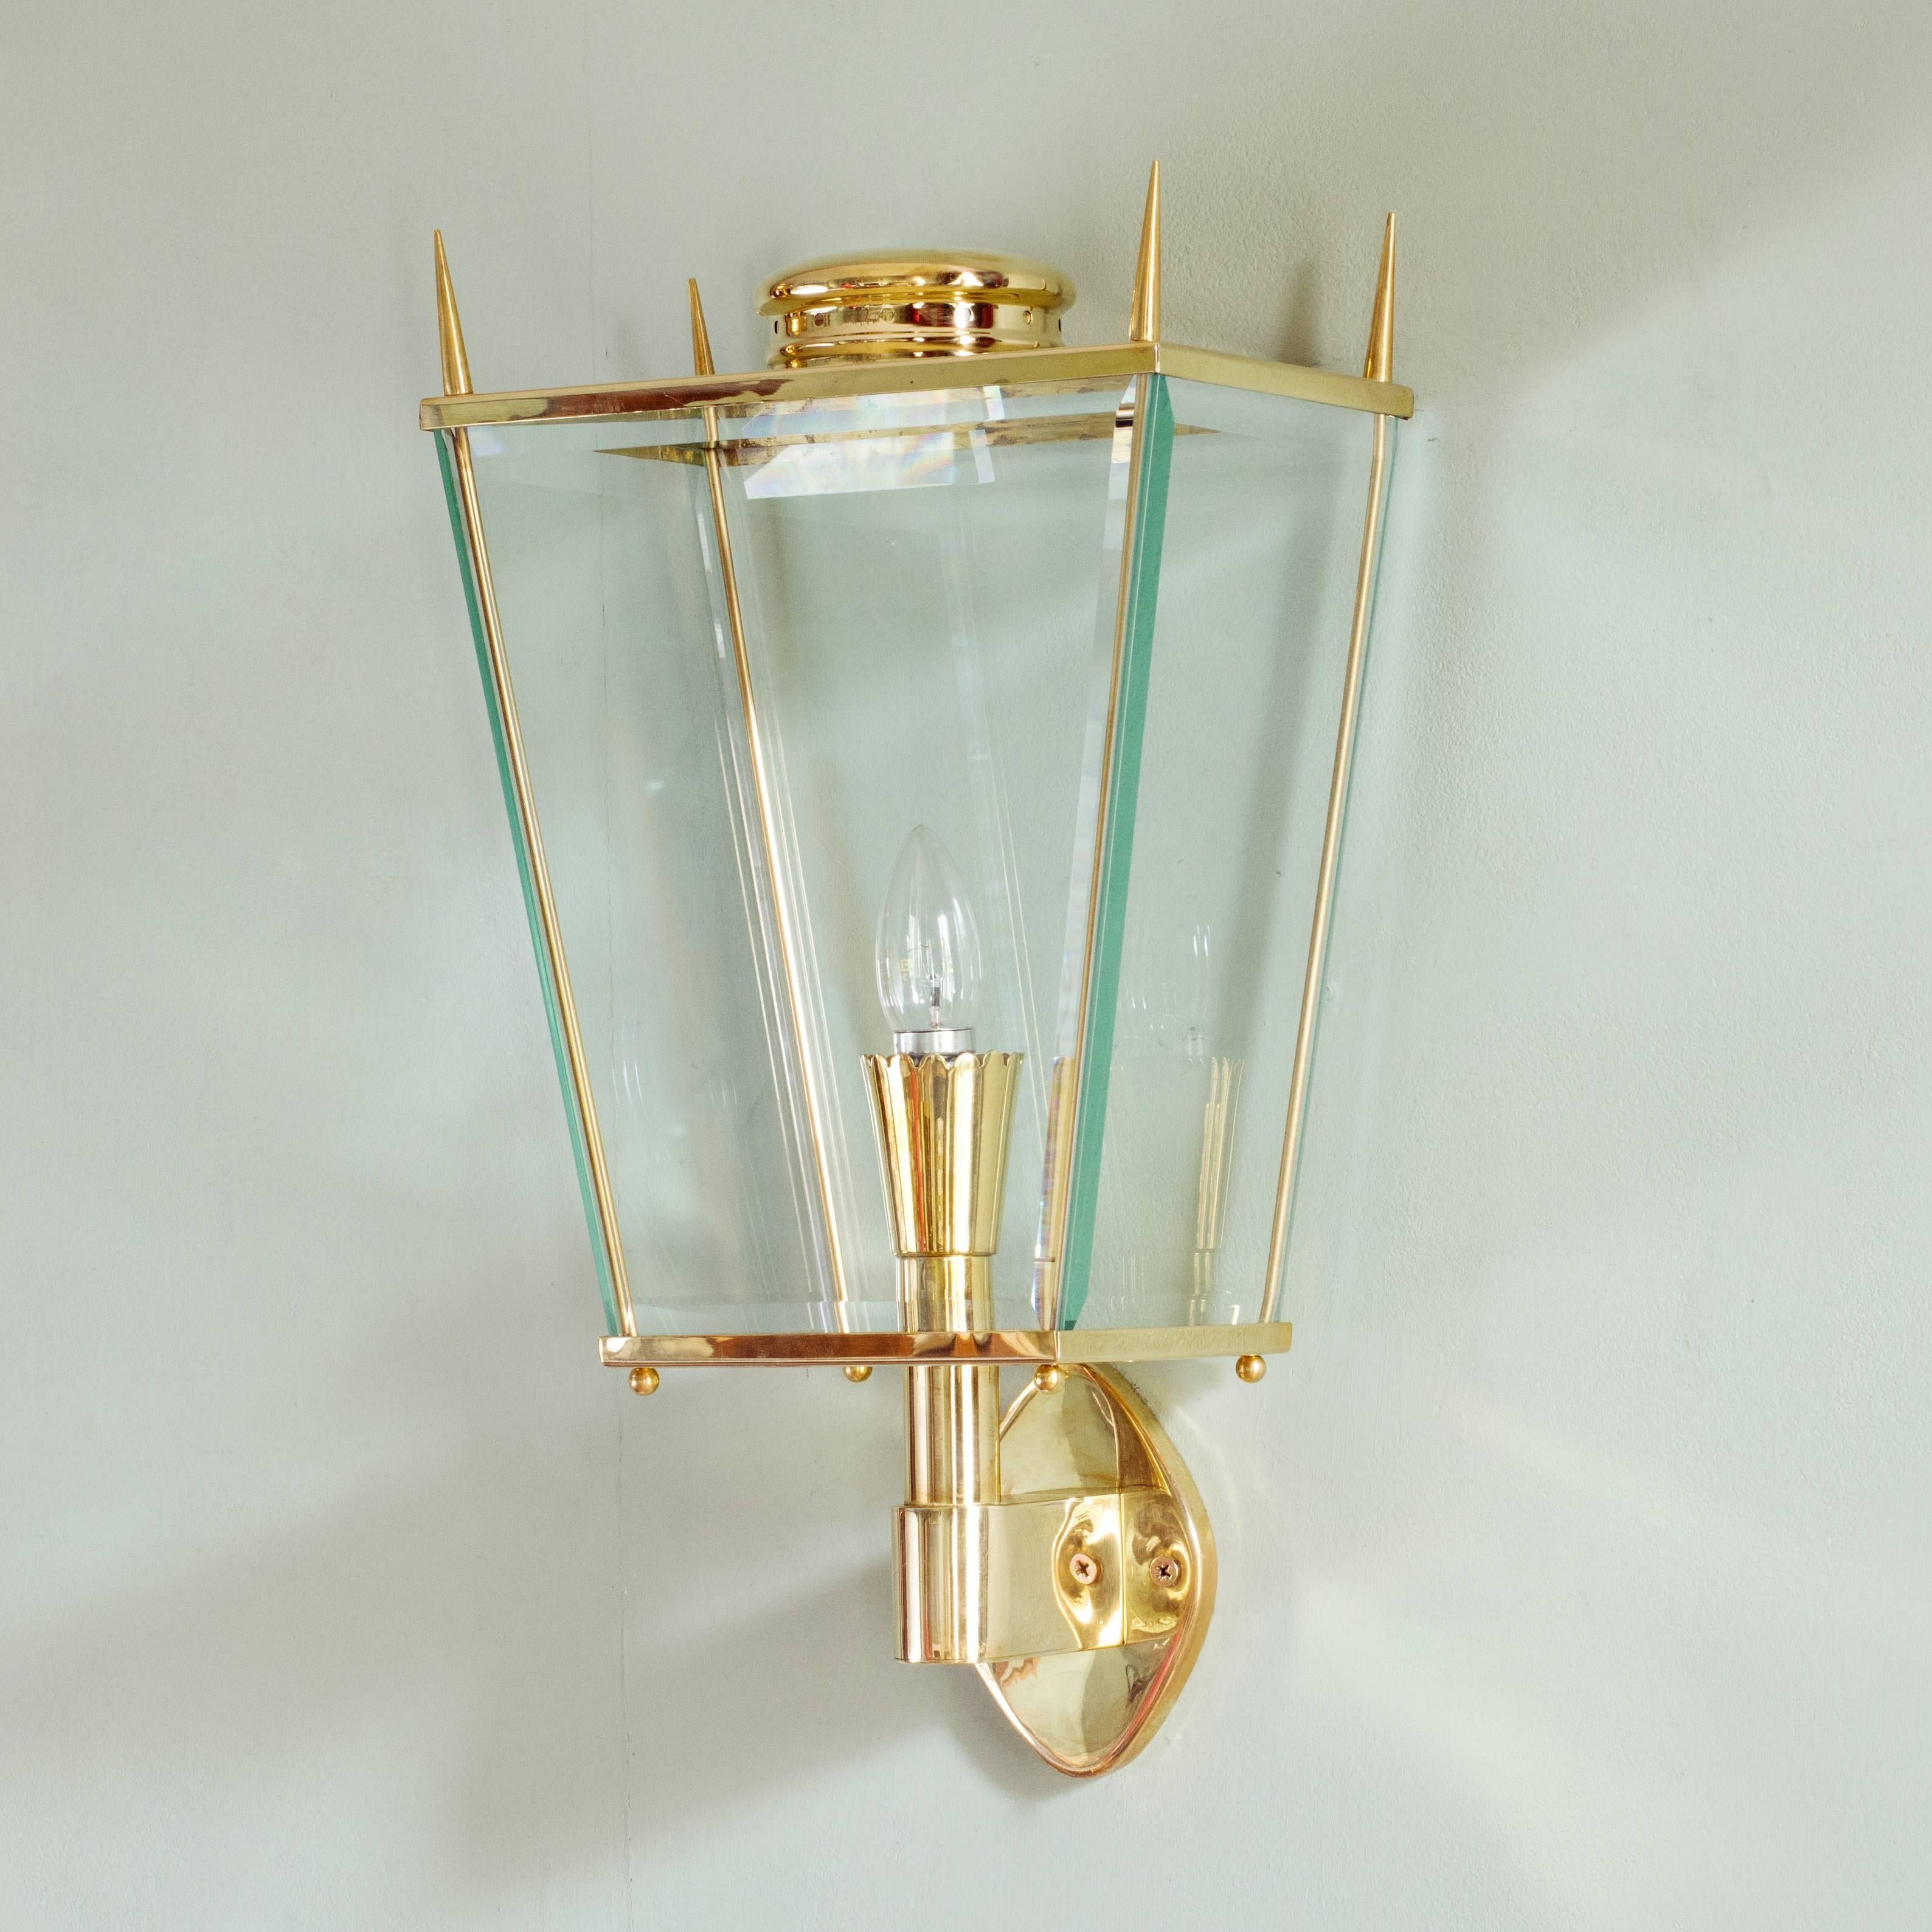 Mid-Century style brass wall lanterns, made by Lassco in the Italian 1960s style, the tapered body with bevelled glazing. Suitable for indoor and covered outdoor use. Handmade in England to order, lead time usually six weeks.

Dimensions: 49.5 cm